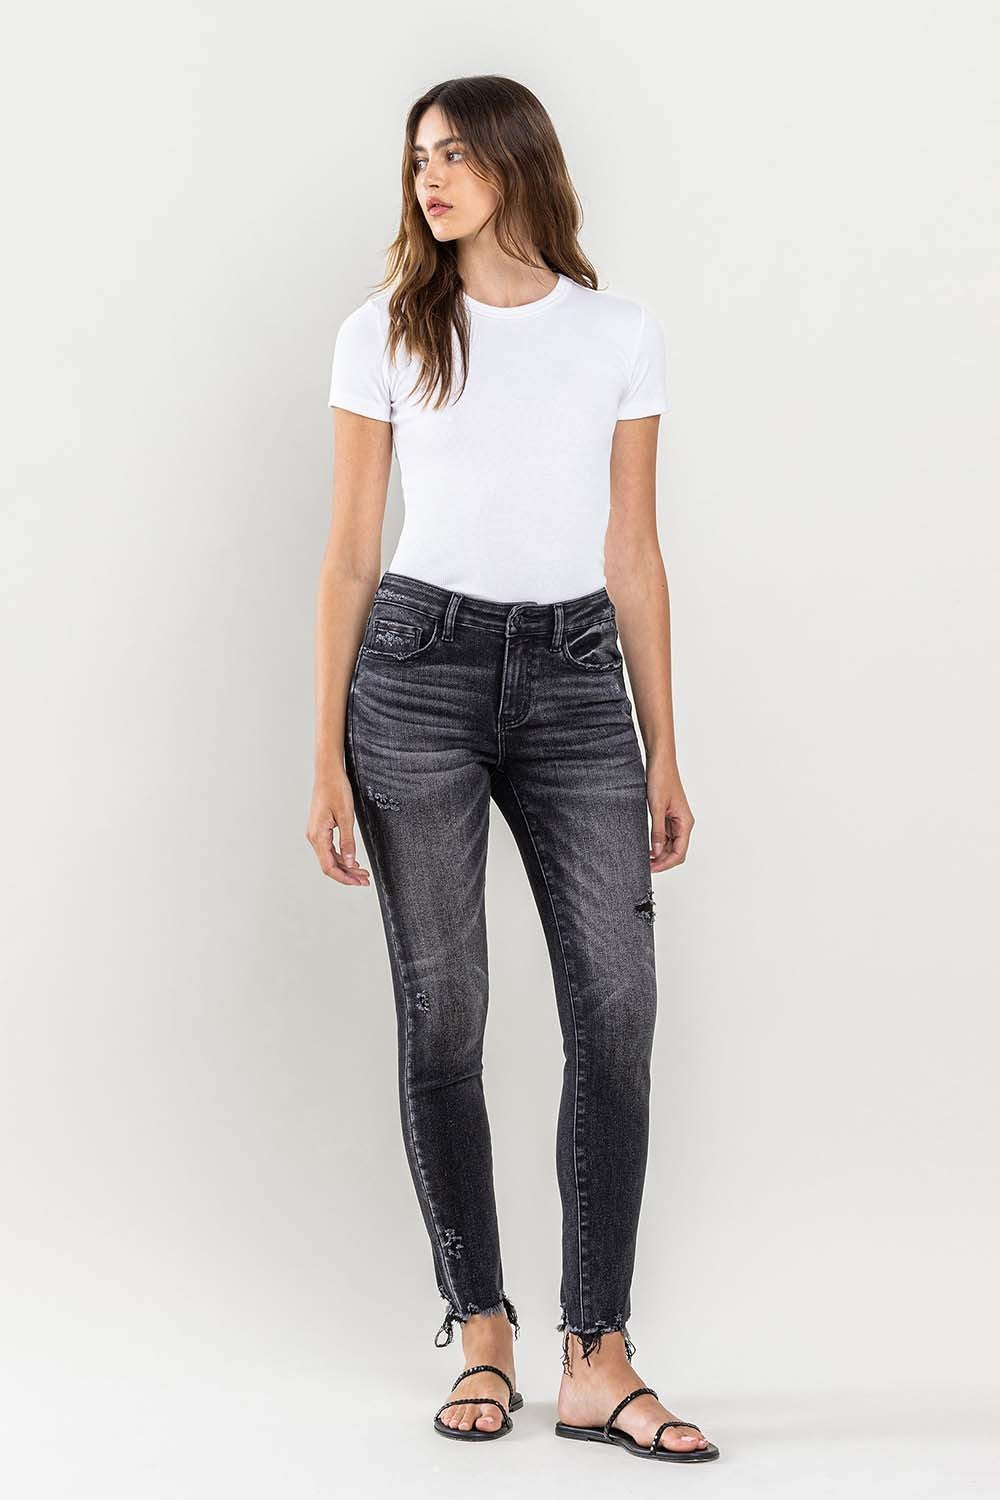 Chic Lovervet Skinny Jeans with a comfy stretch, edgy raw hem, and a versatile cropped cut for day-to-night style. Elevate your denim game!